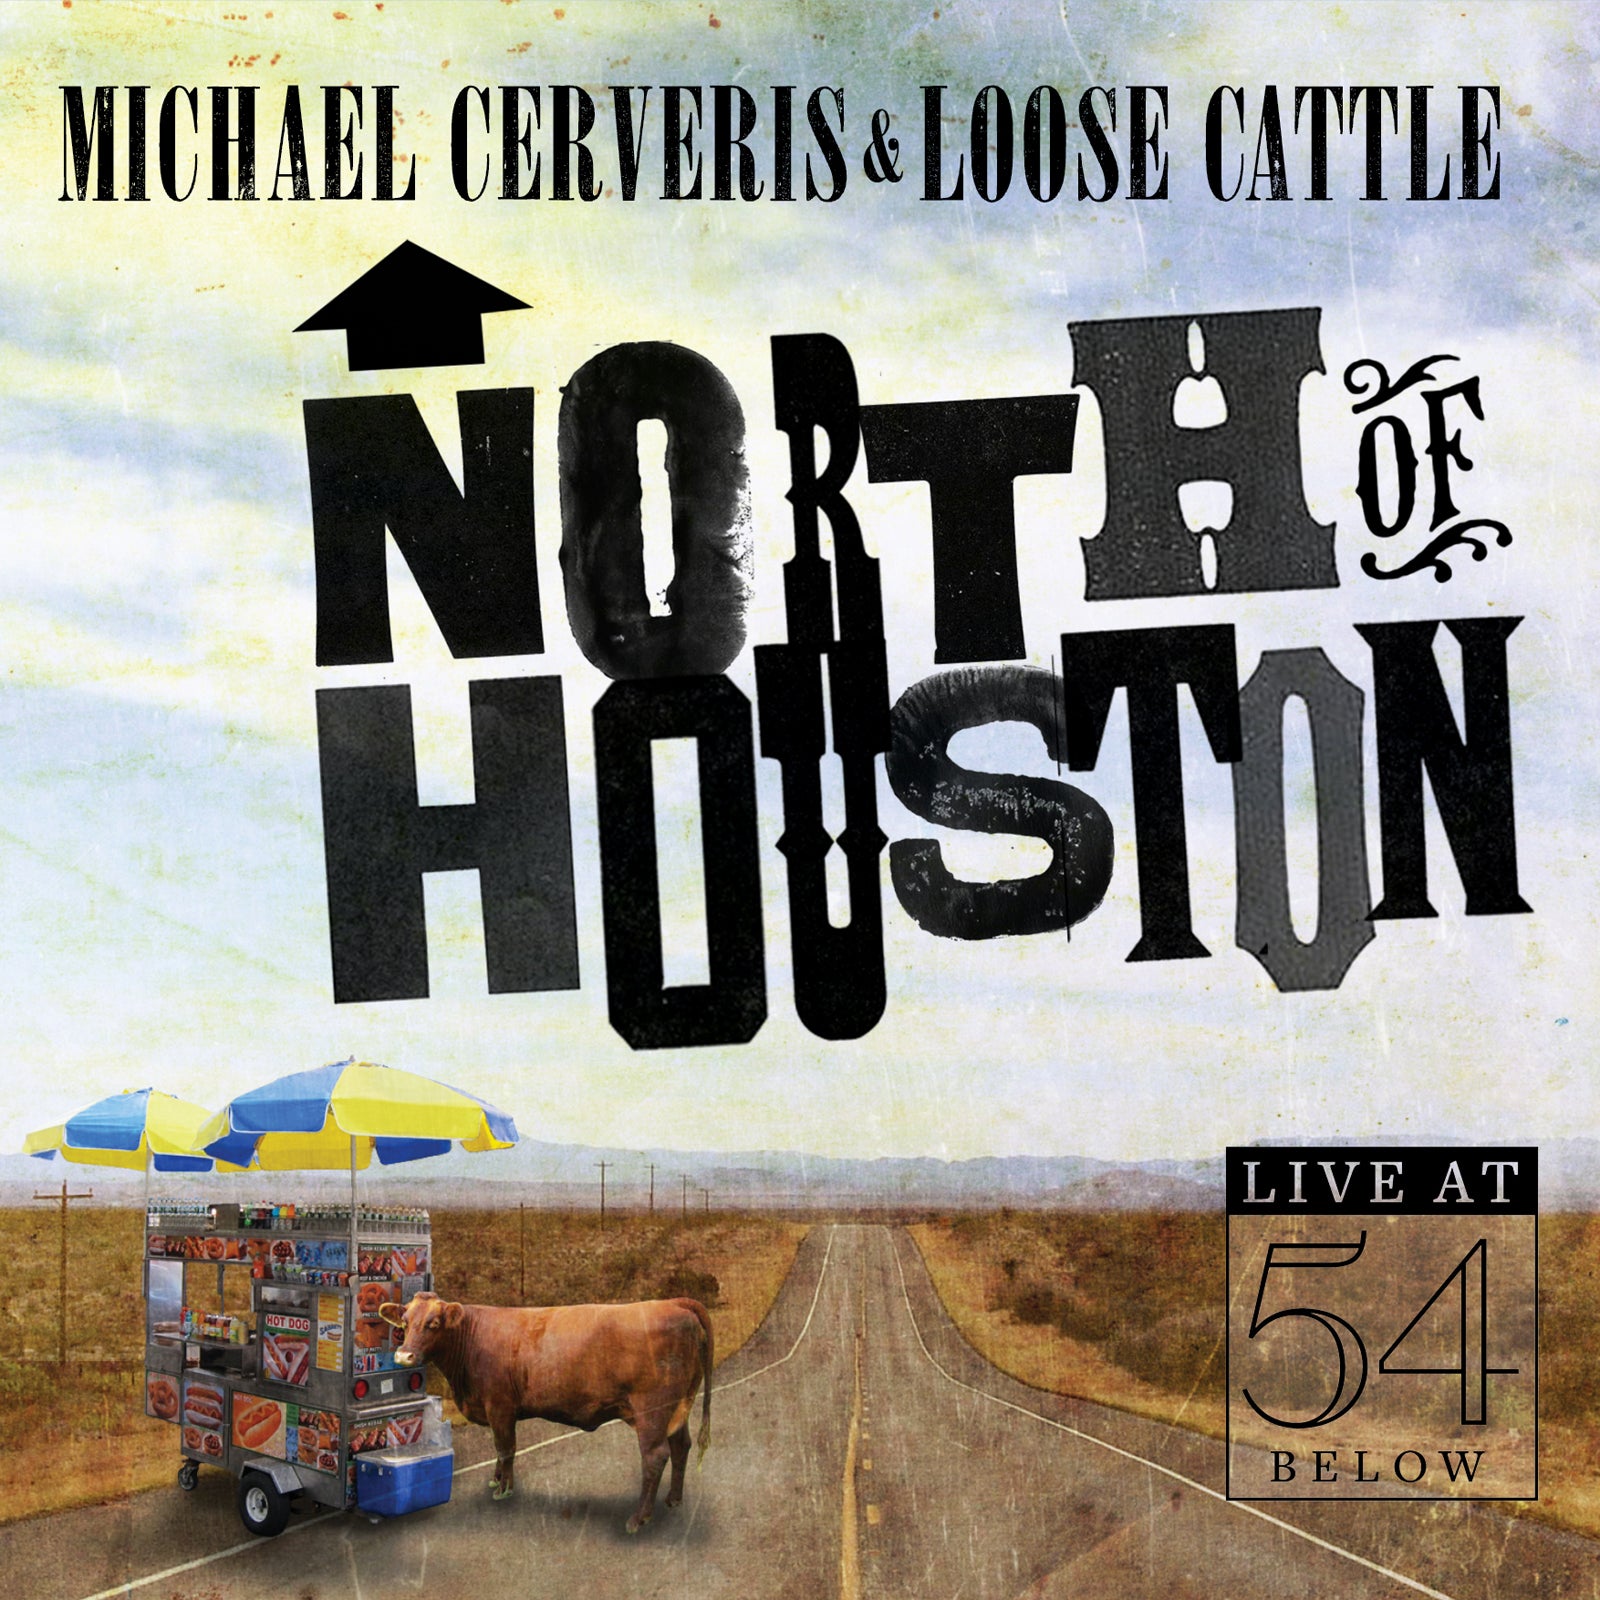 Michael Cerveris & Loose Cattle: North of Houston - Live at 54 Below [CD]